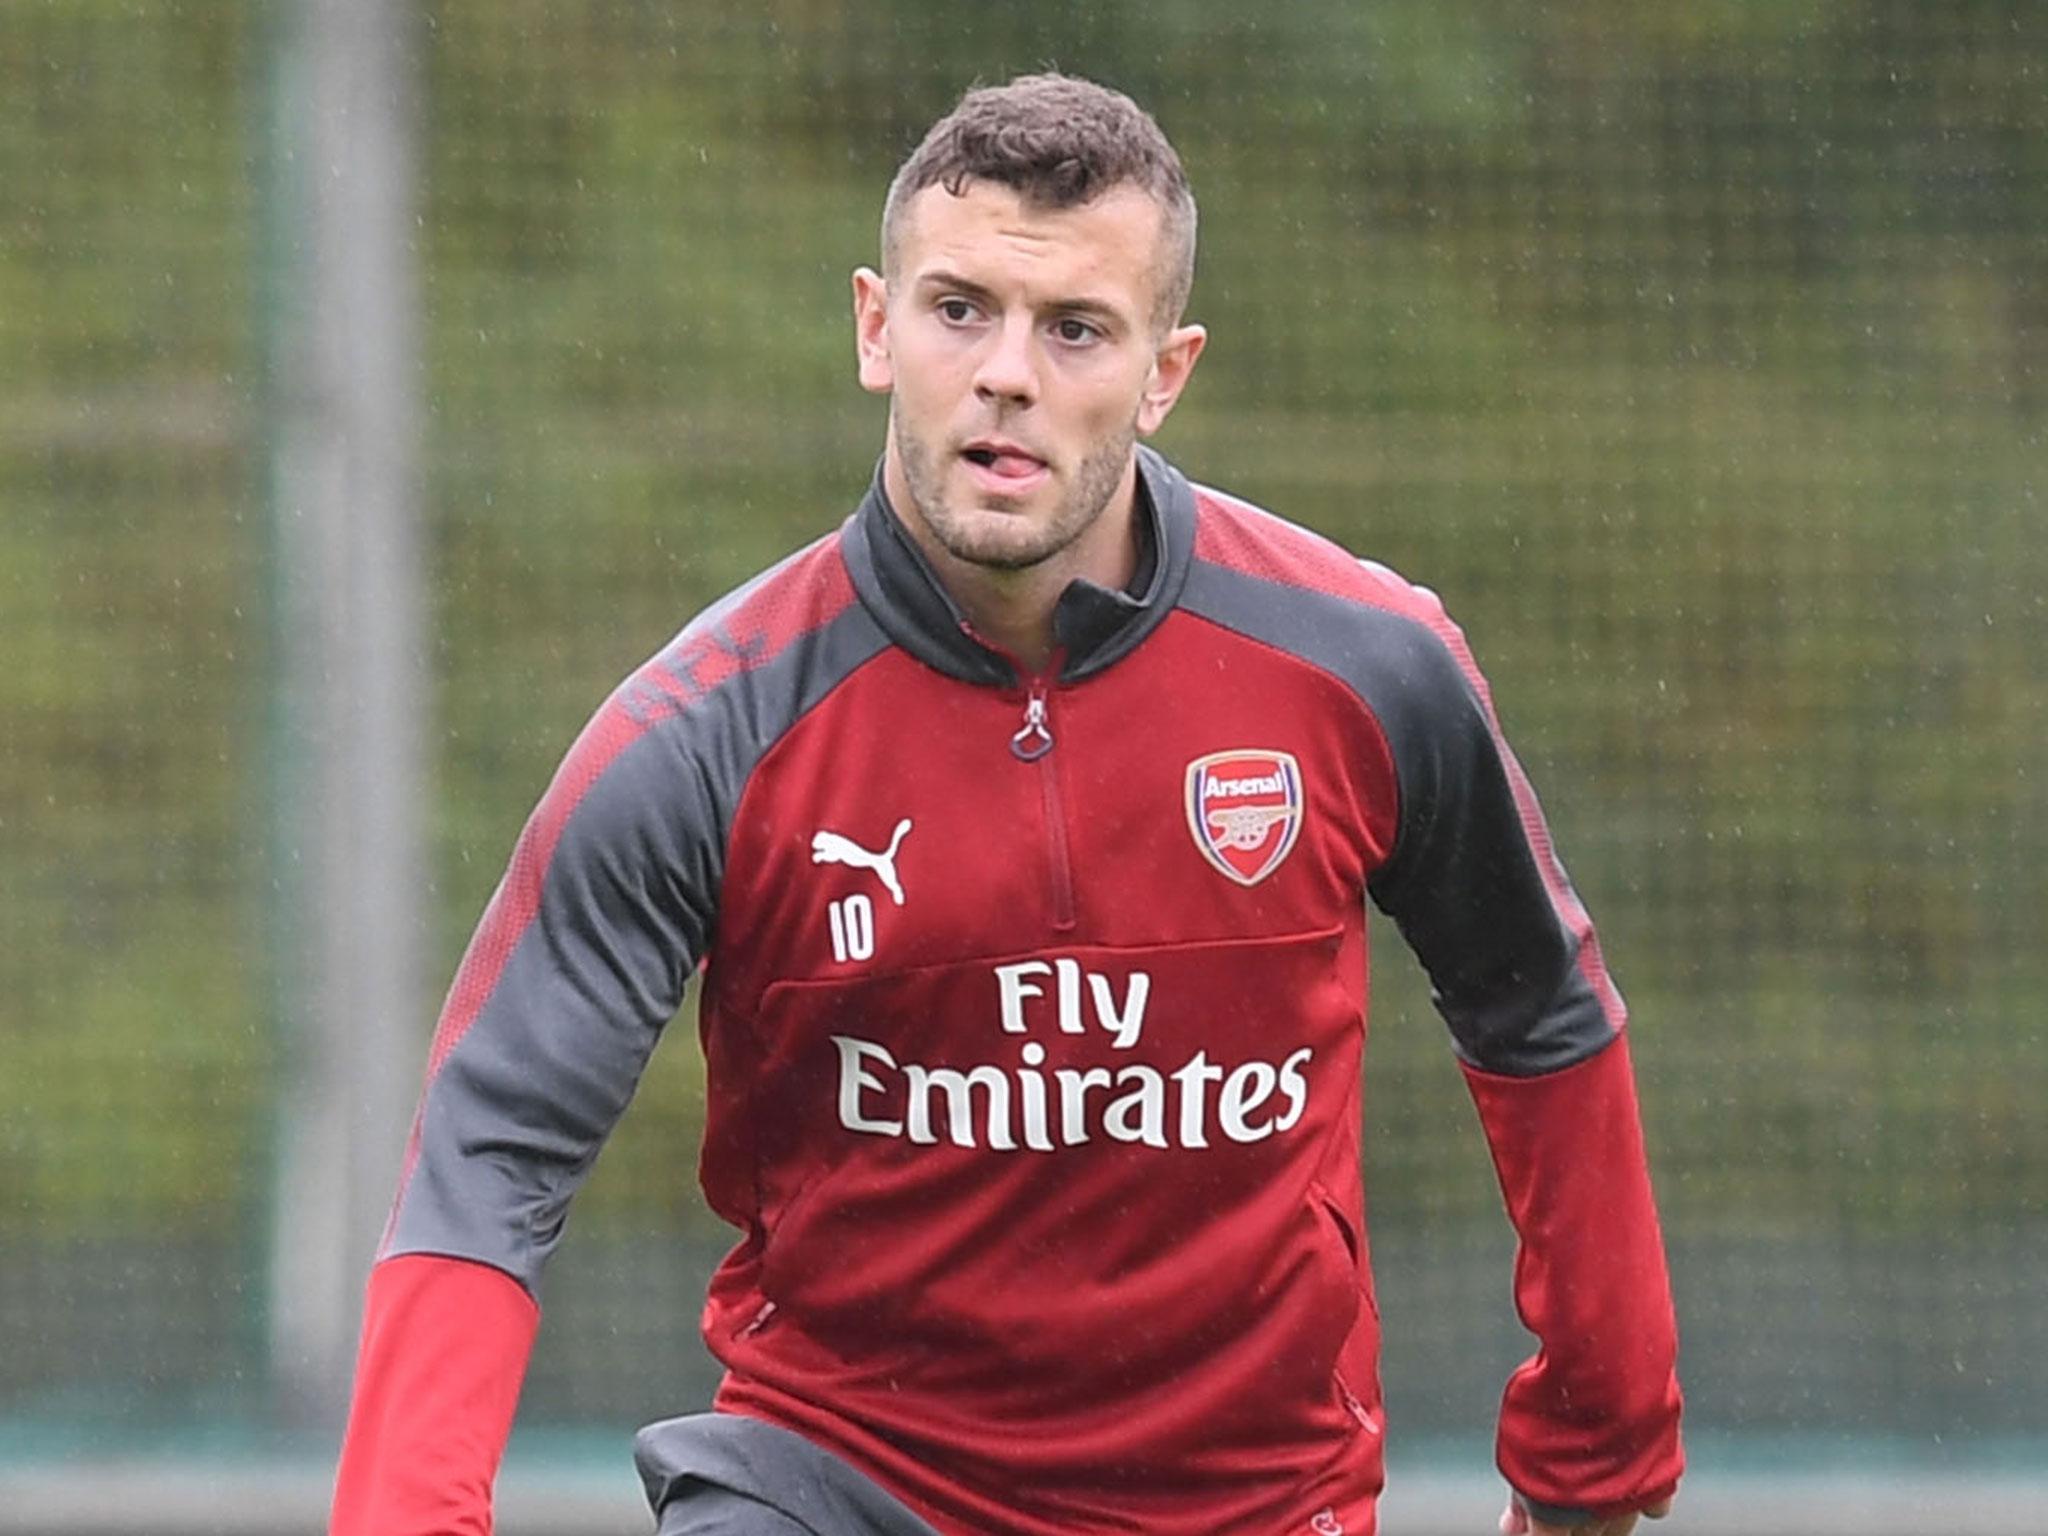 Jack Wilshere is set for a chance to prove himself again at Arsenal